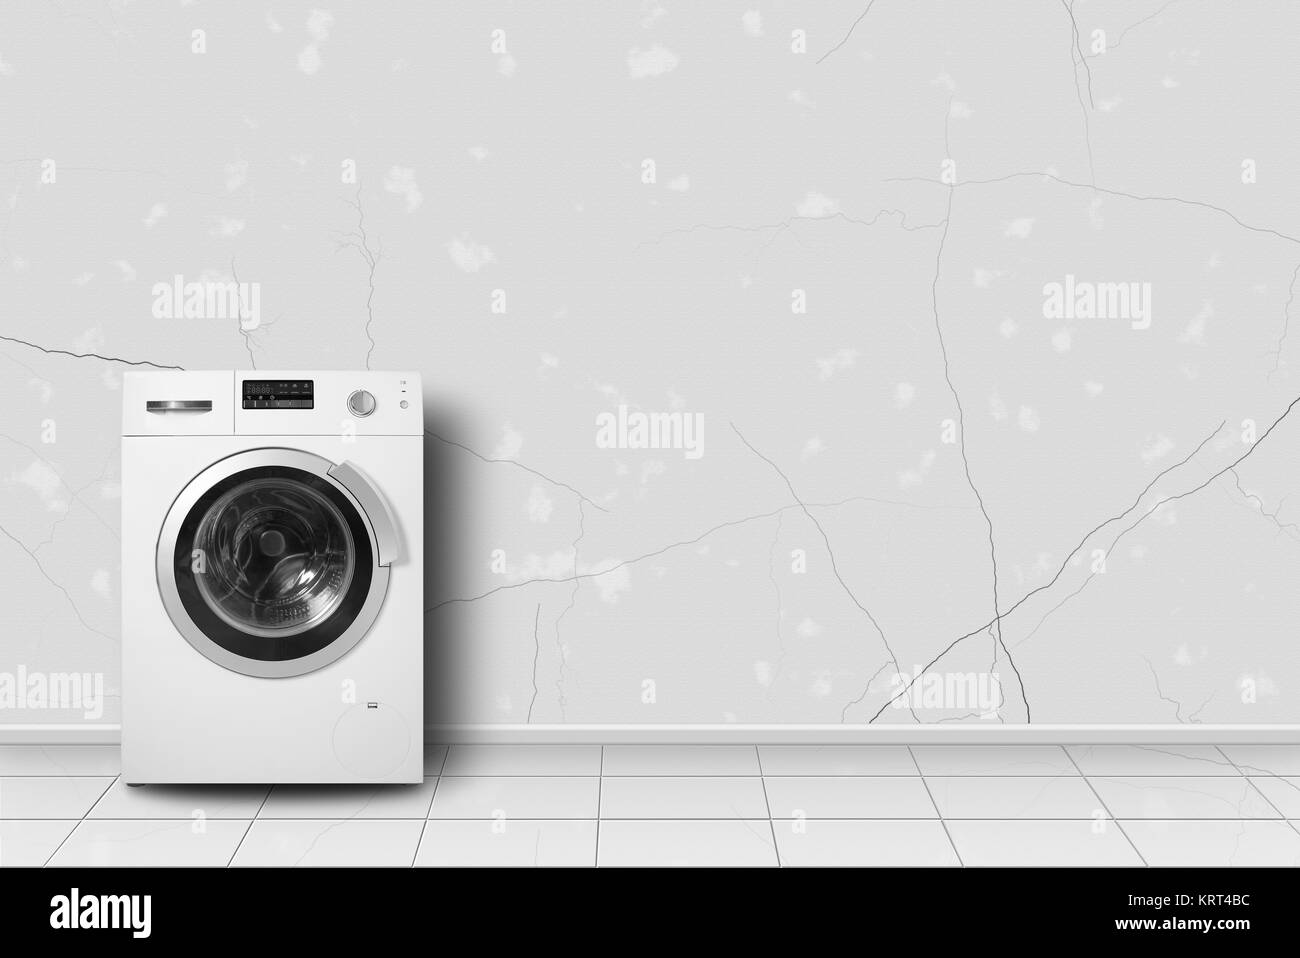 Major appliance - Washing machine in home interier on a light wall background. Stock Photo